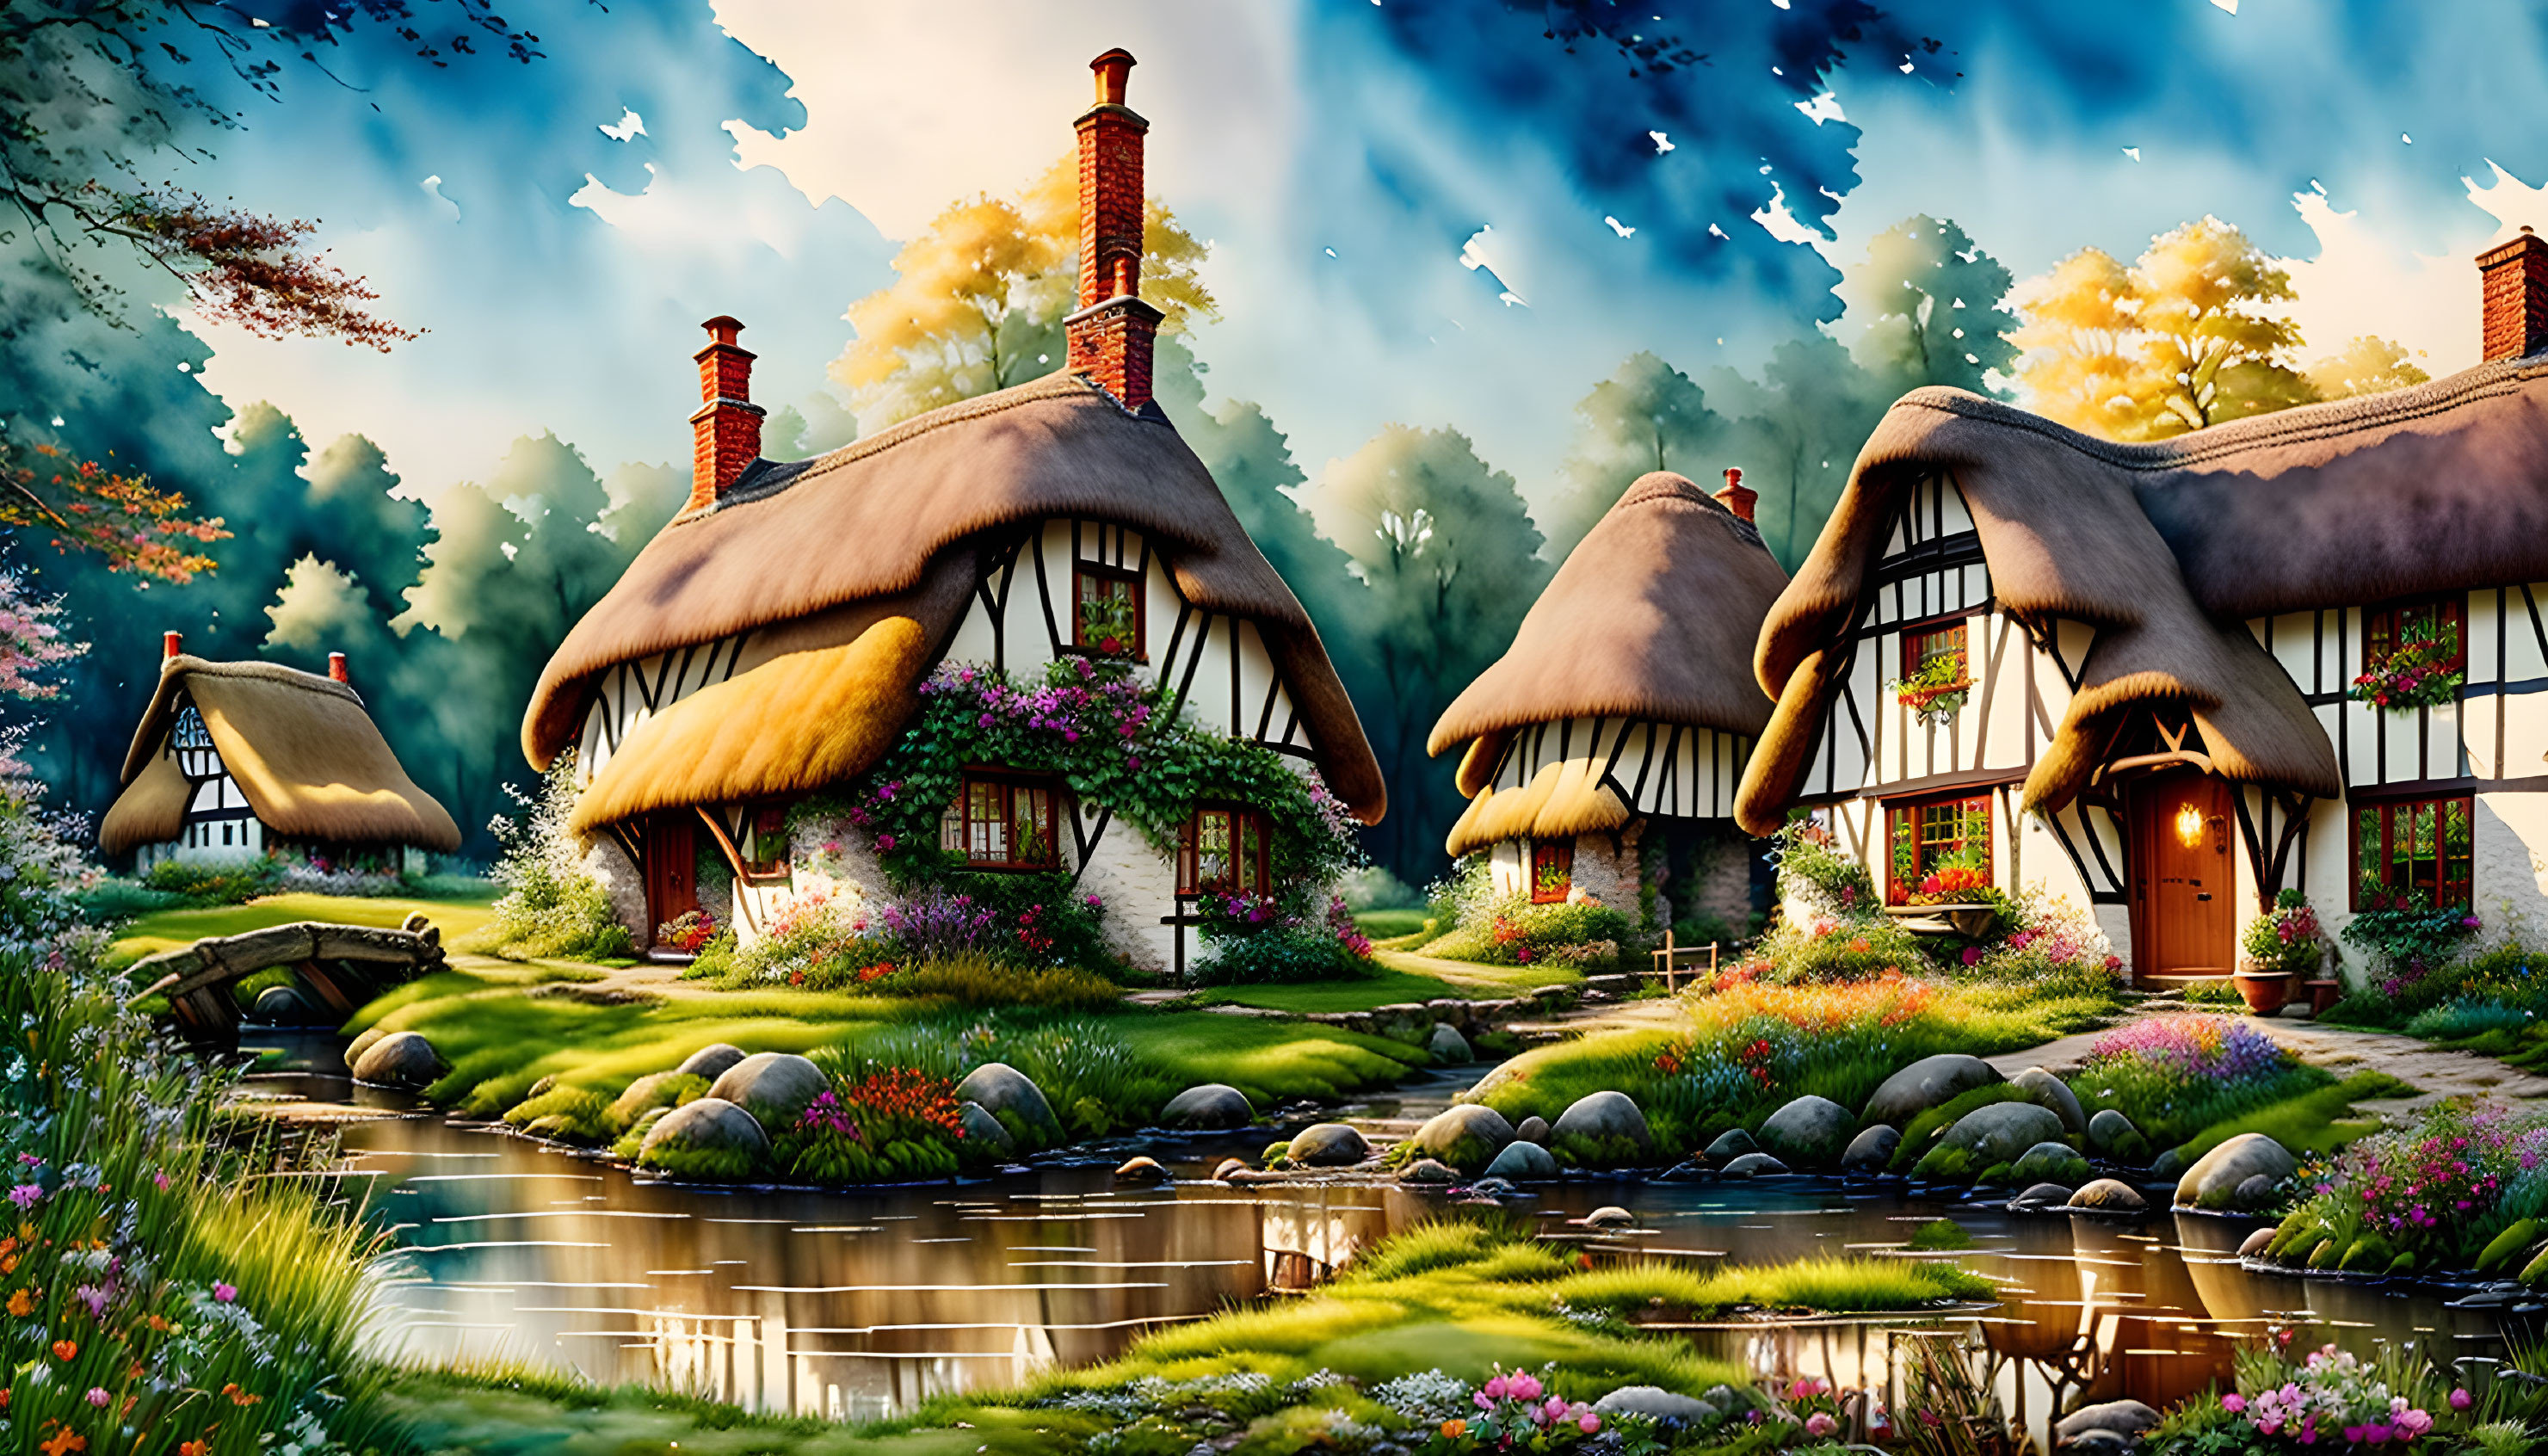 Tranquil village landscape with thatched-roof cottages and vibrant flowers